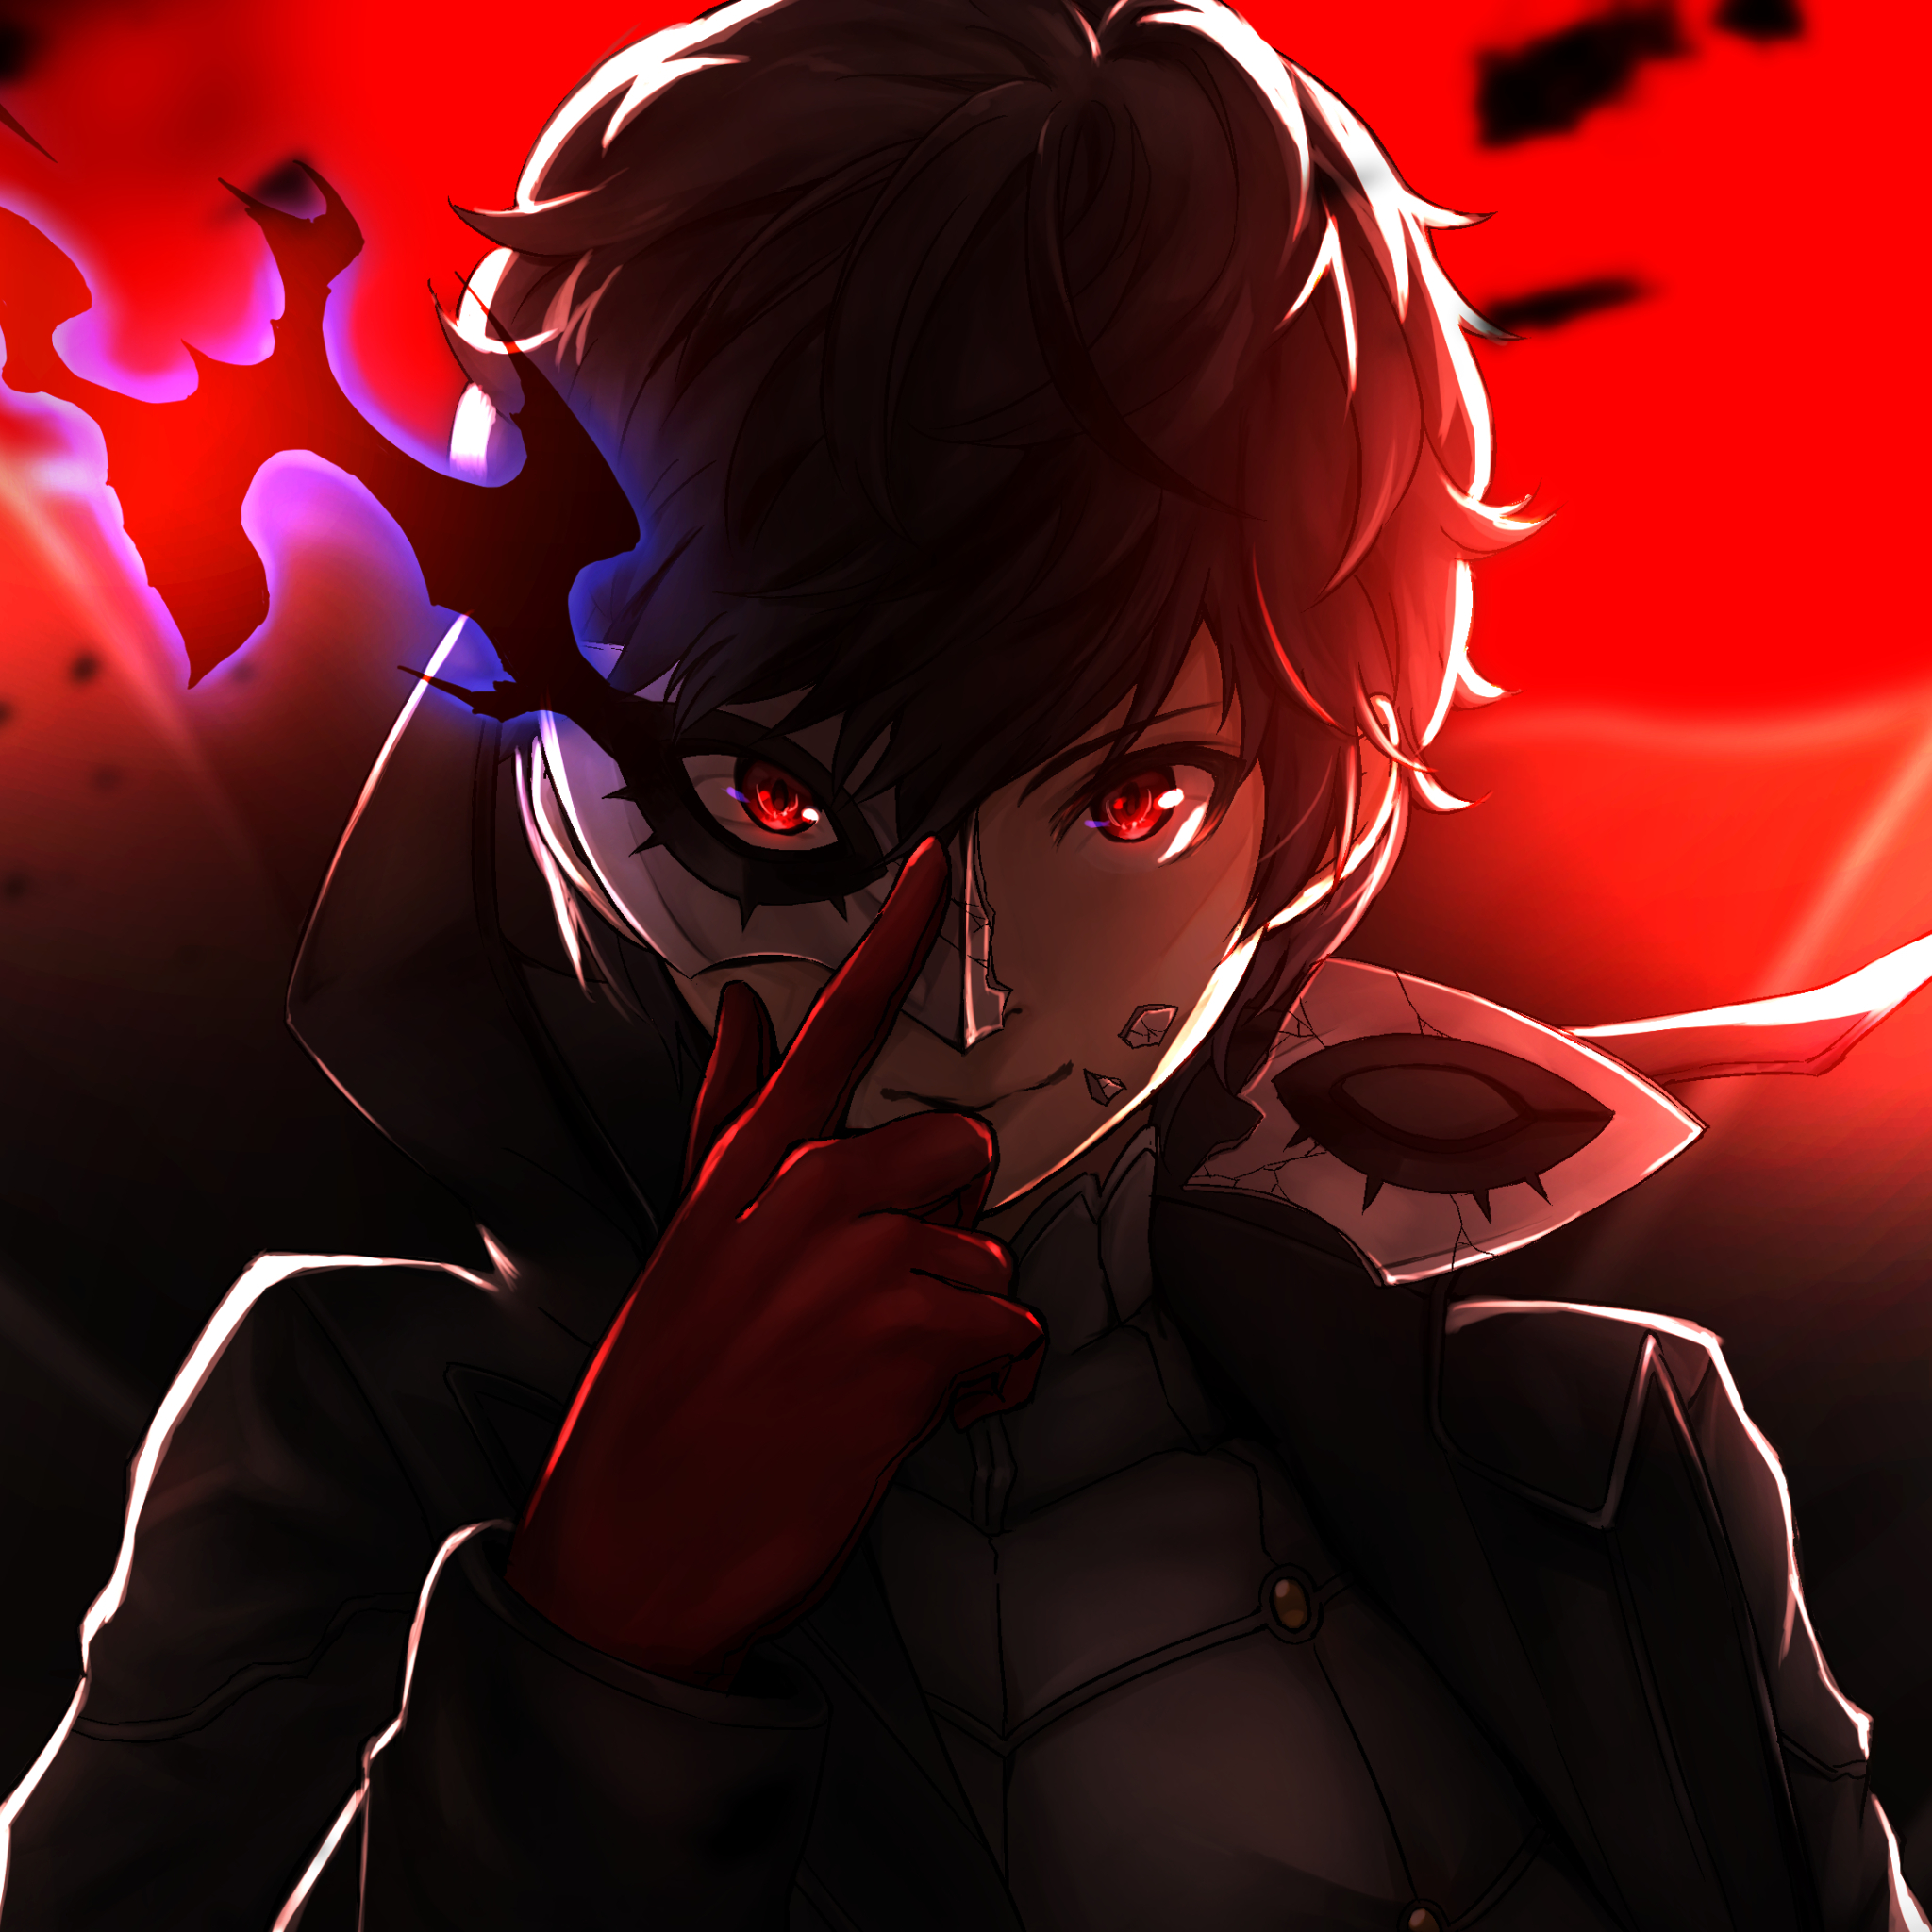 48x48 Protagoinst Persona 5 Ipad Air Wallpaper Hd Anime 4k Wallpapers Images Photos And Background Wallpapers Den